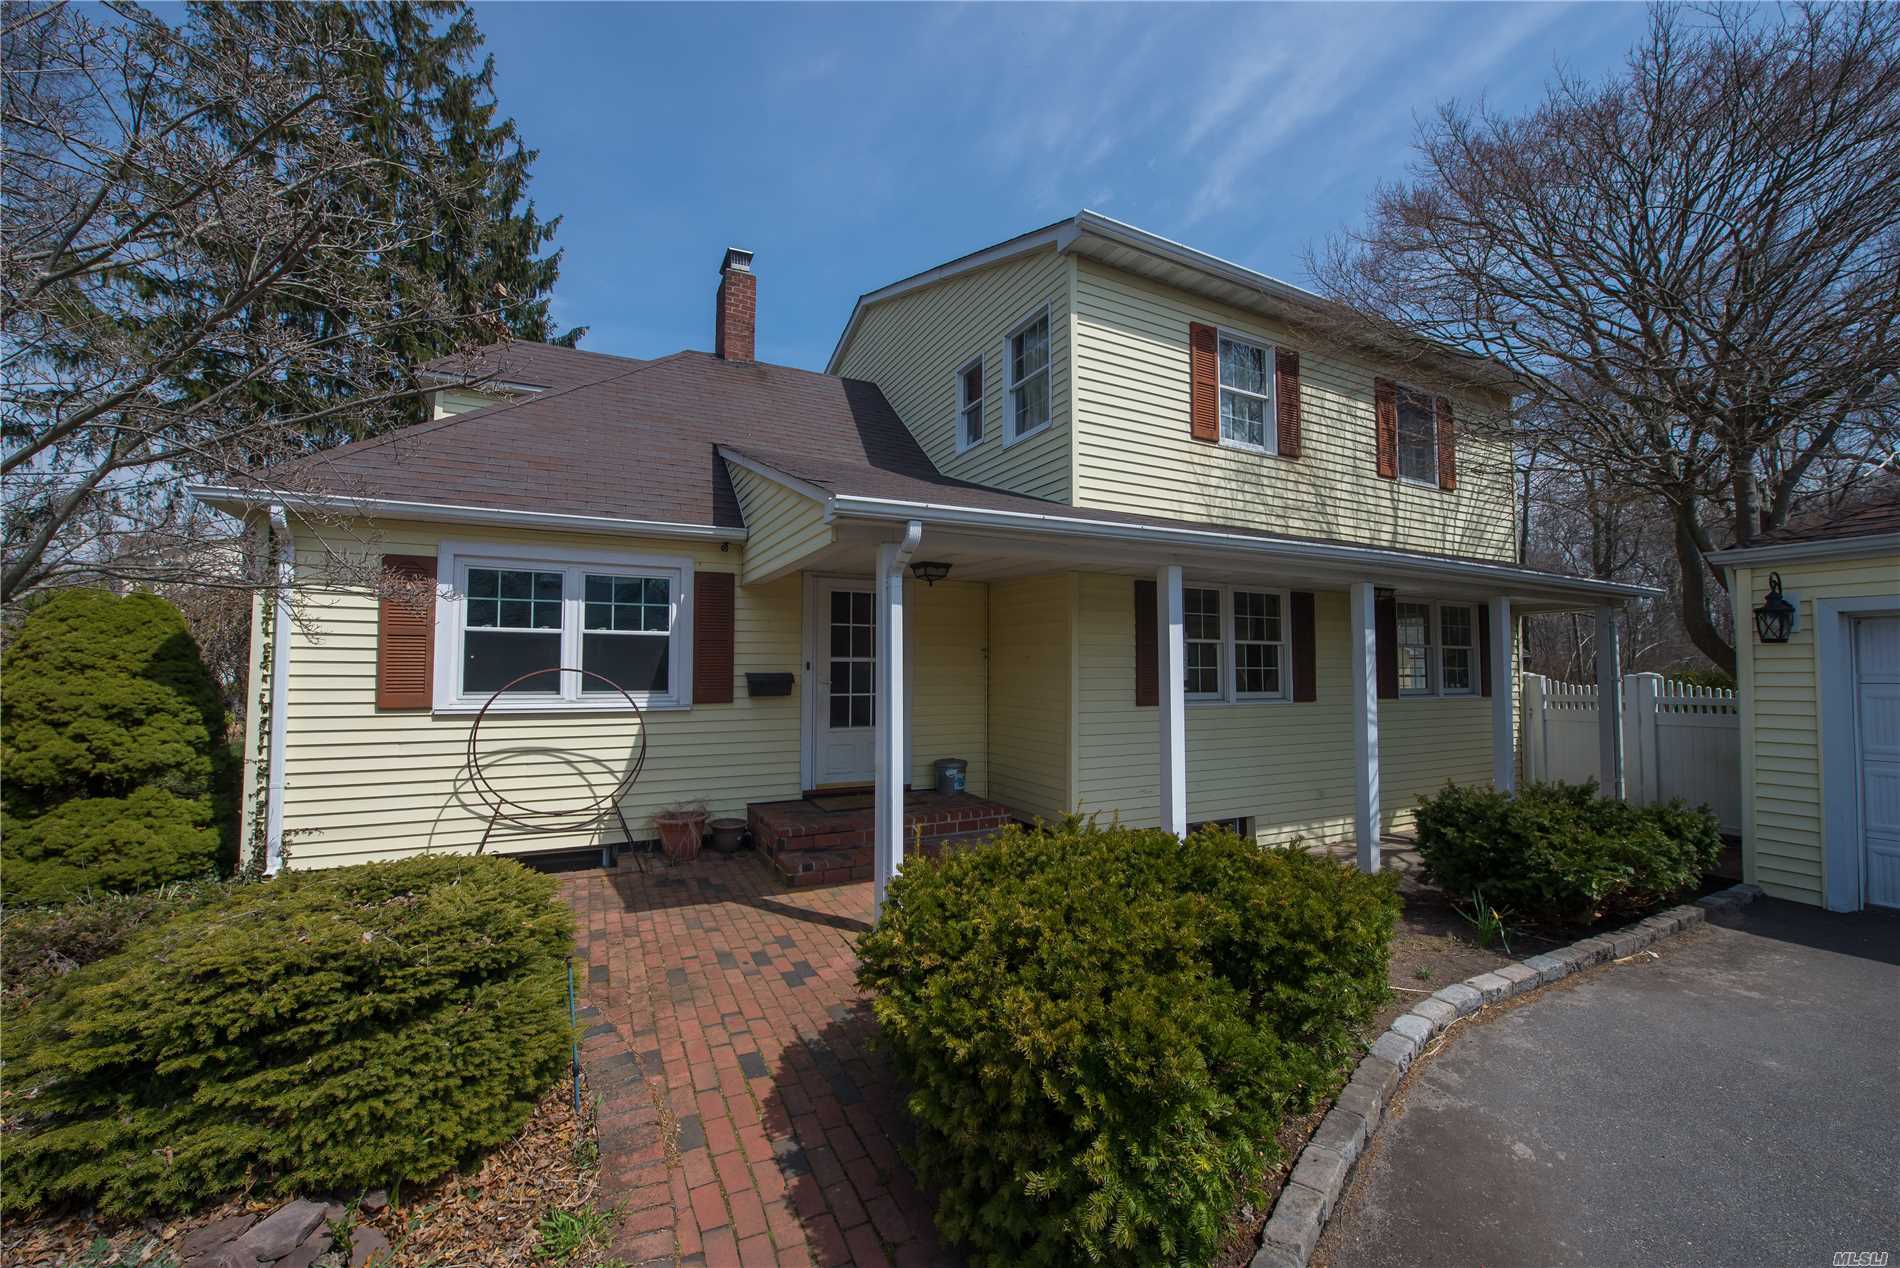 Spacious Colonial With Many Updates Done In The Last 3 Years. New Boiler, Wood Floors, Unique And Charming Property. Gunite Pool, Gas, New Driveway.